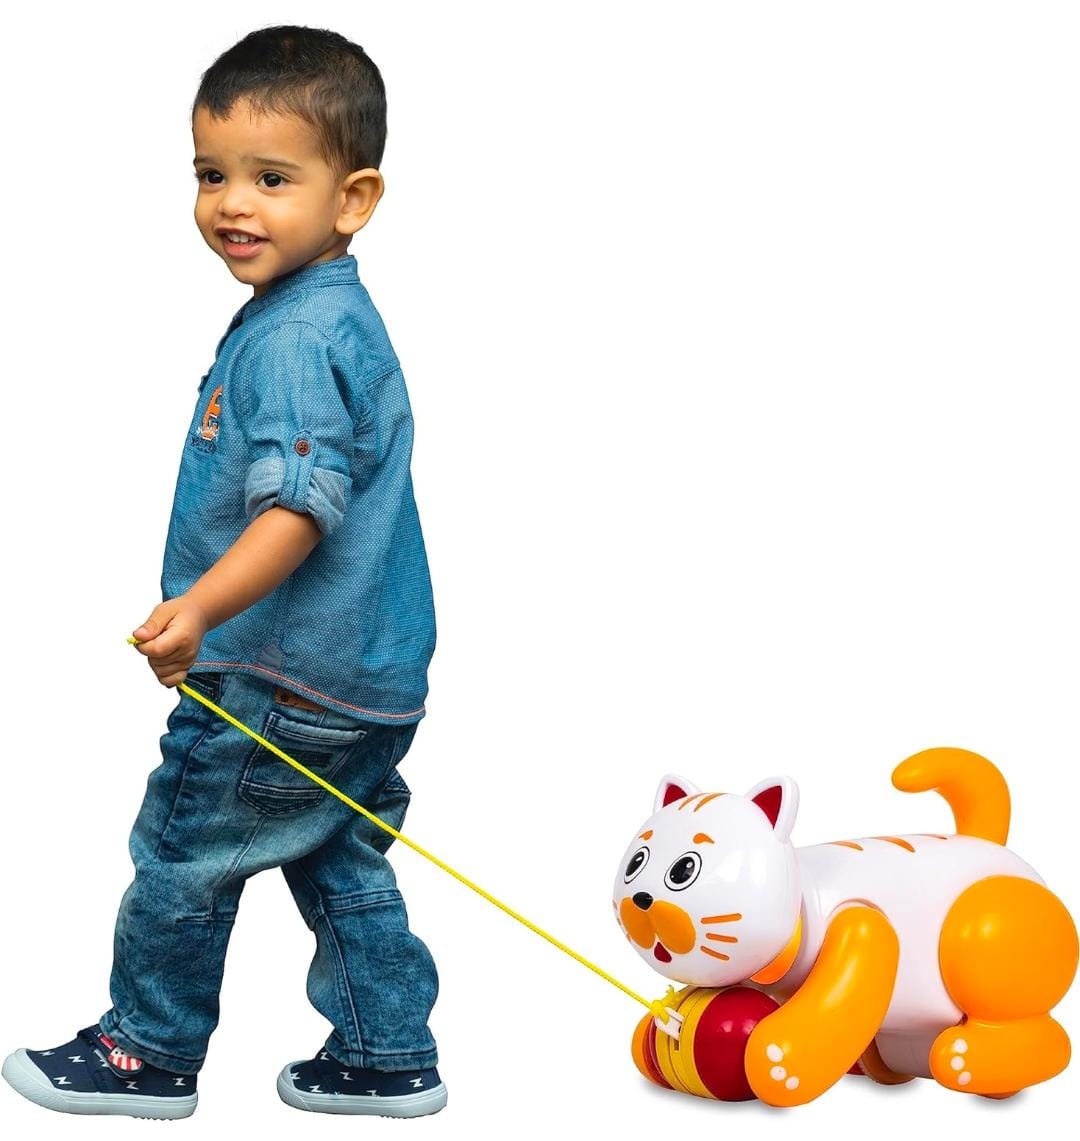 Giggles-My Pet Billy for 18+ months by Funskool